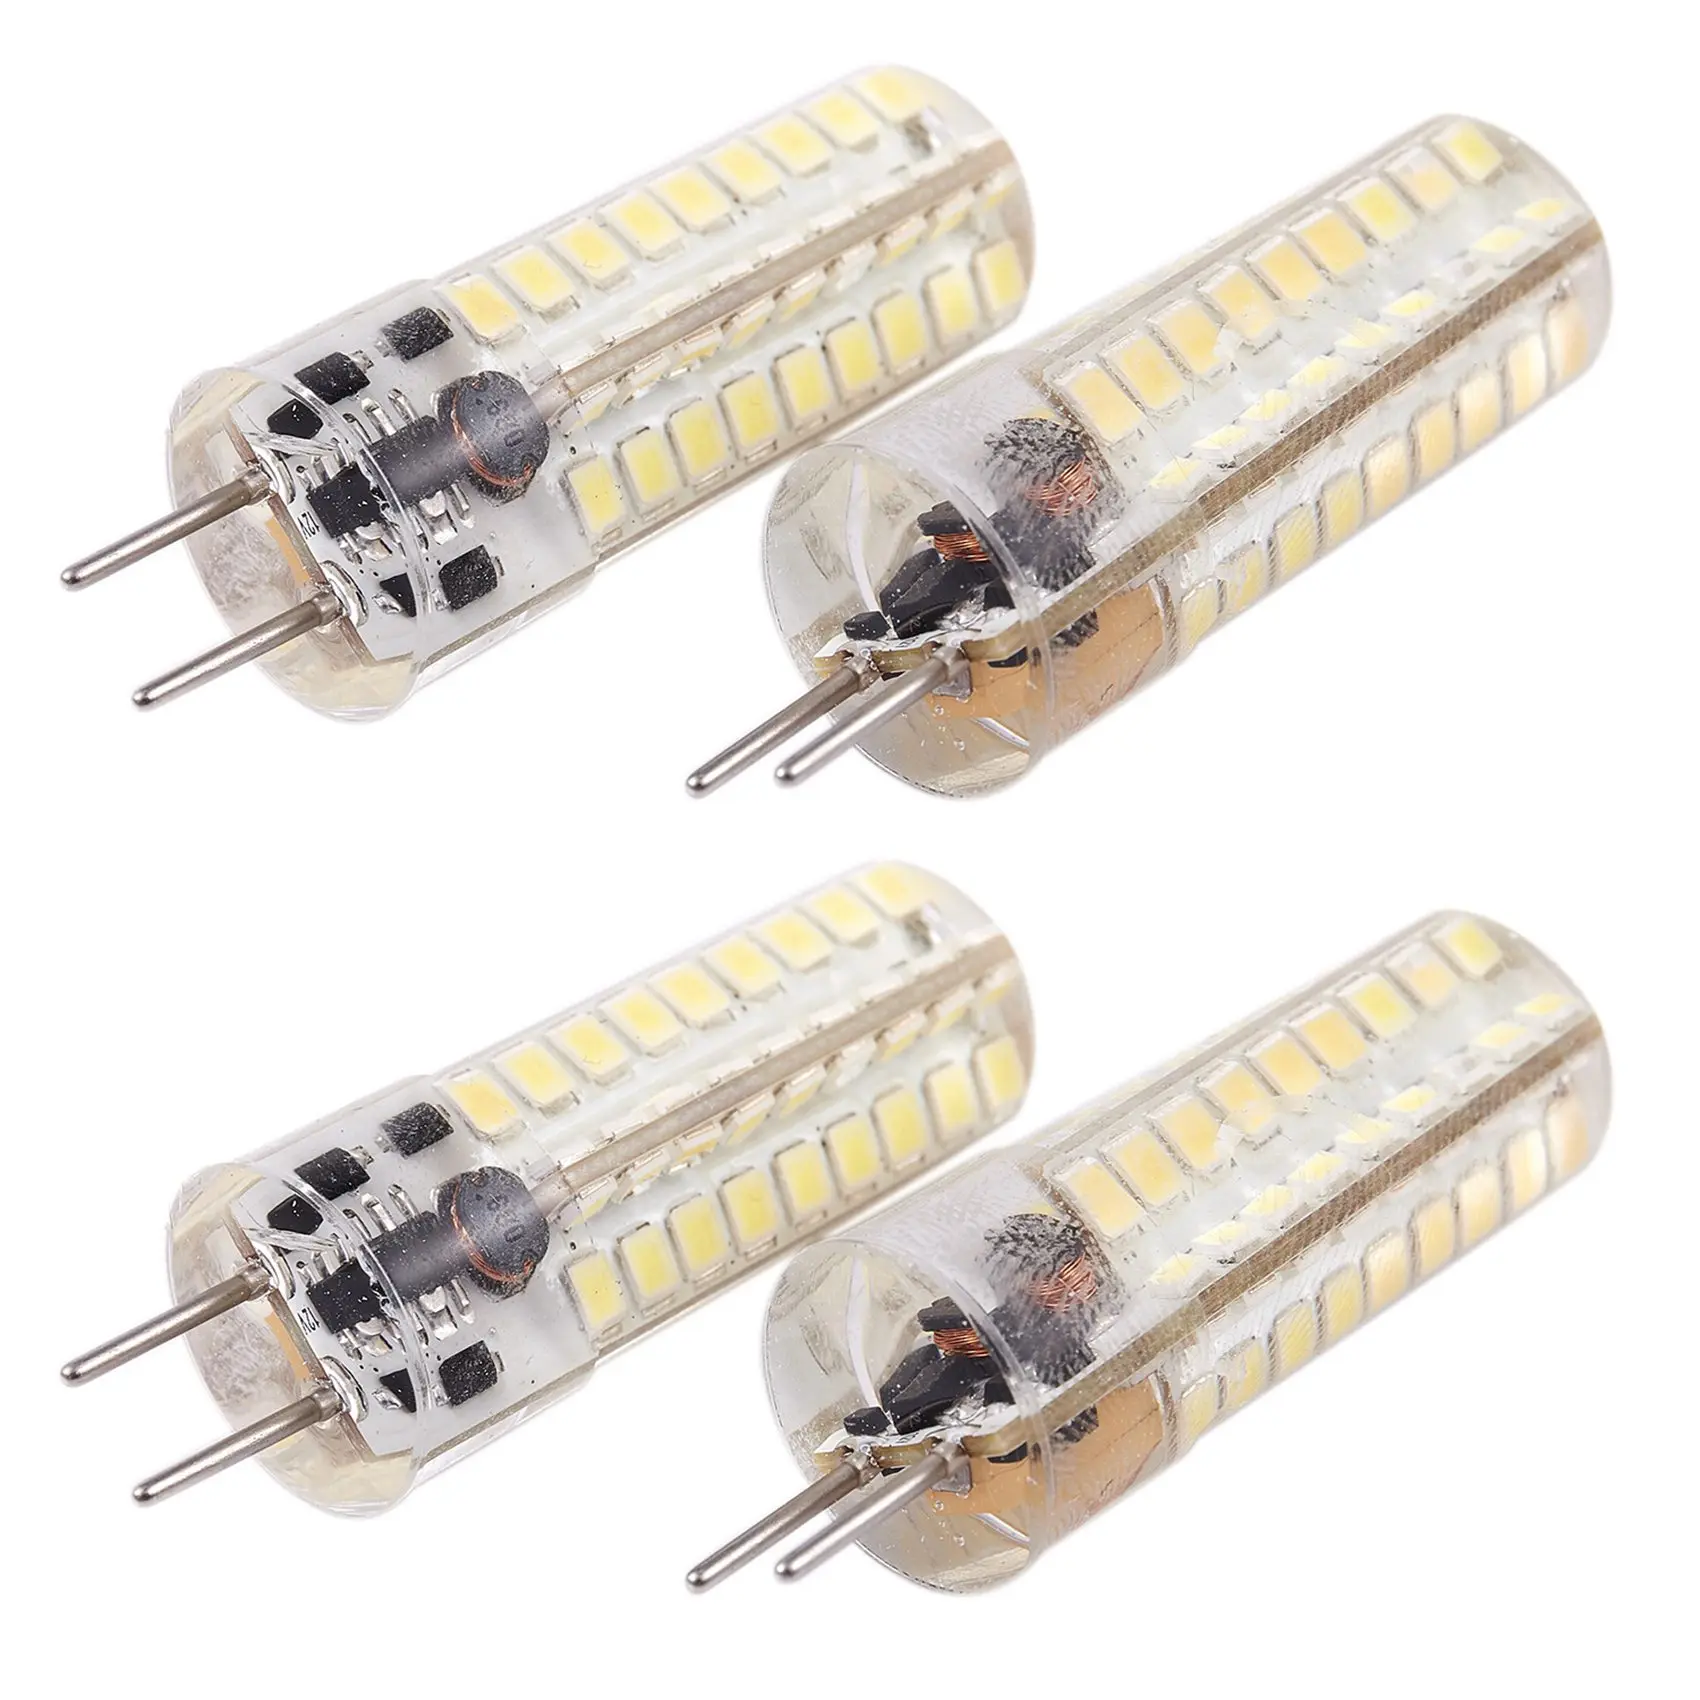 

4X 6.5W GY6.35 LED Bulbs 72 2835 SMD LED 320Lm 50W Halogen Lamps Equivalent Dimmable White 6000K 360 Degree Beam Angle